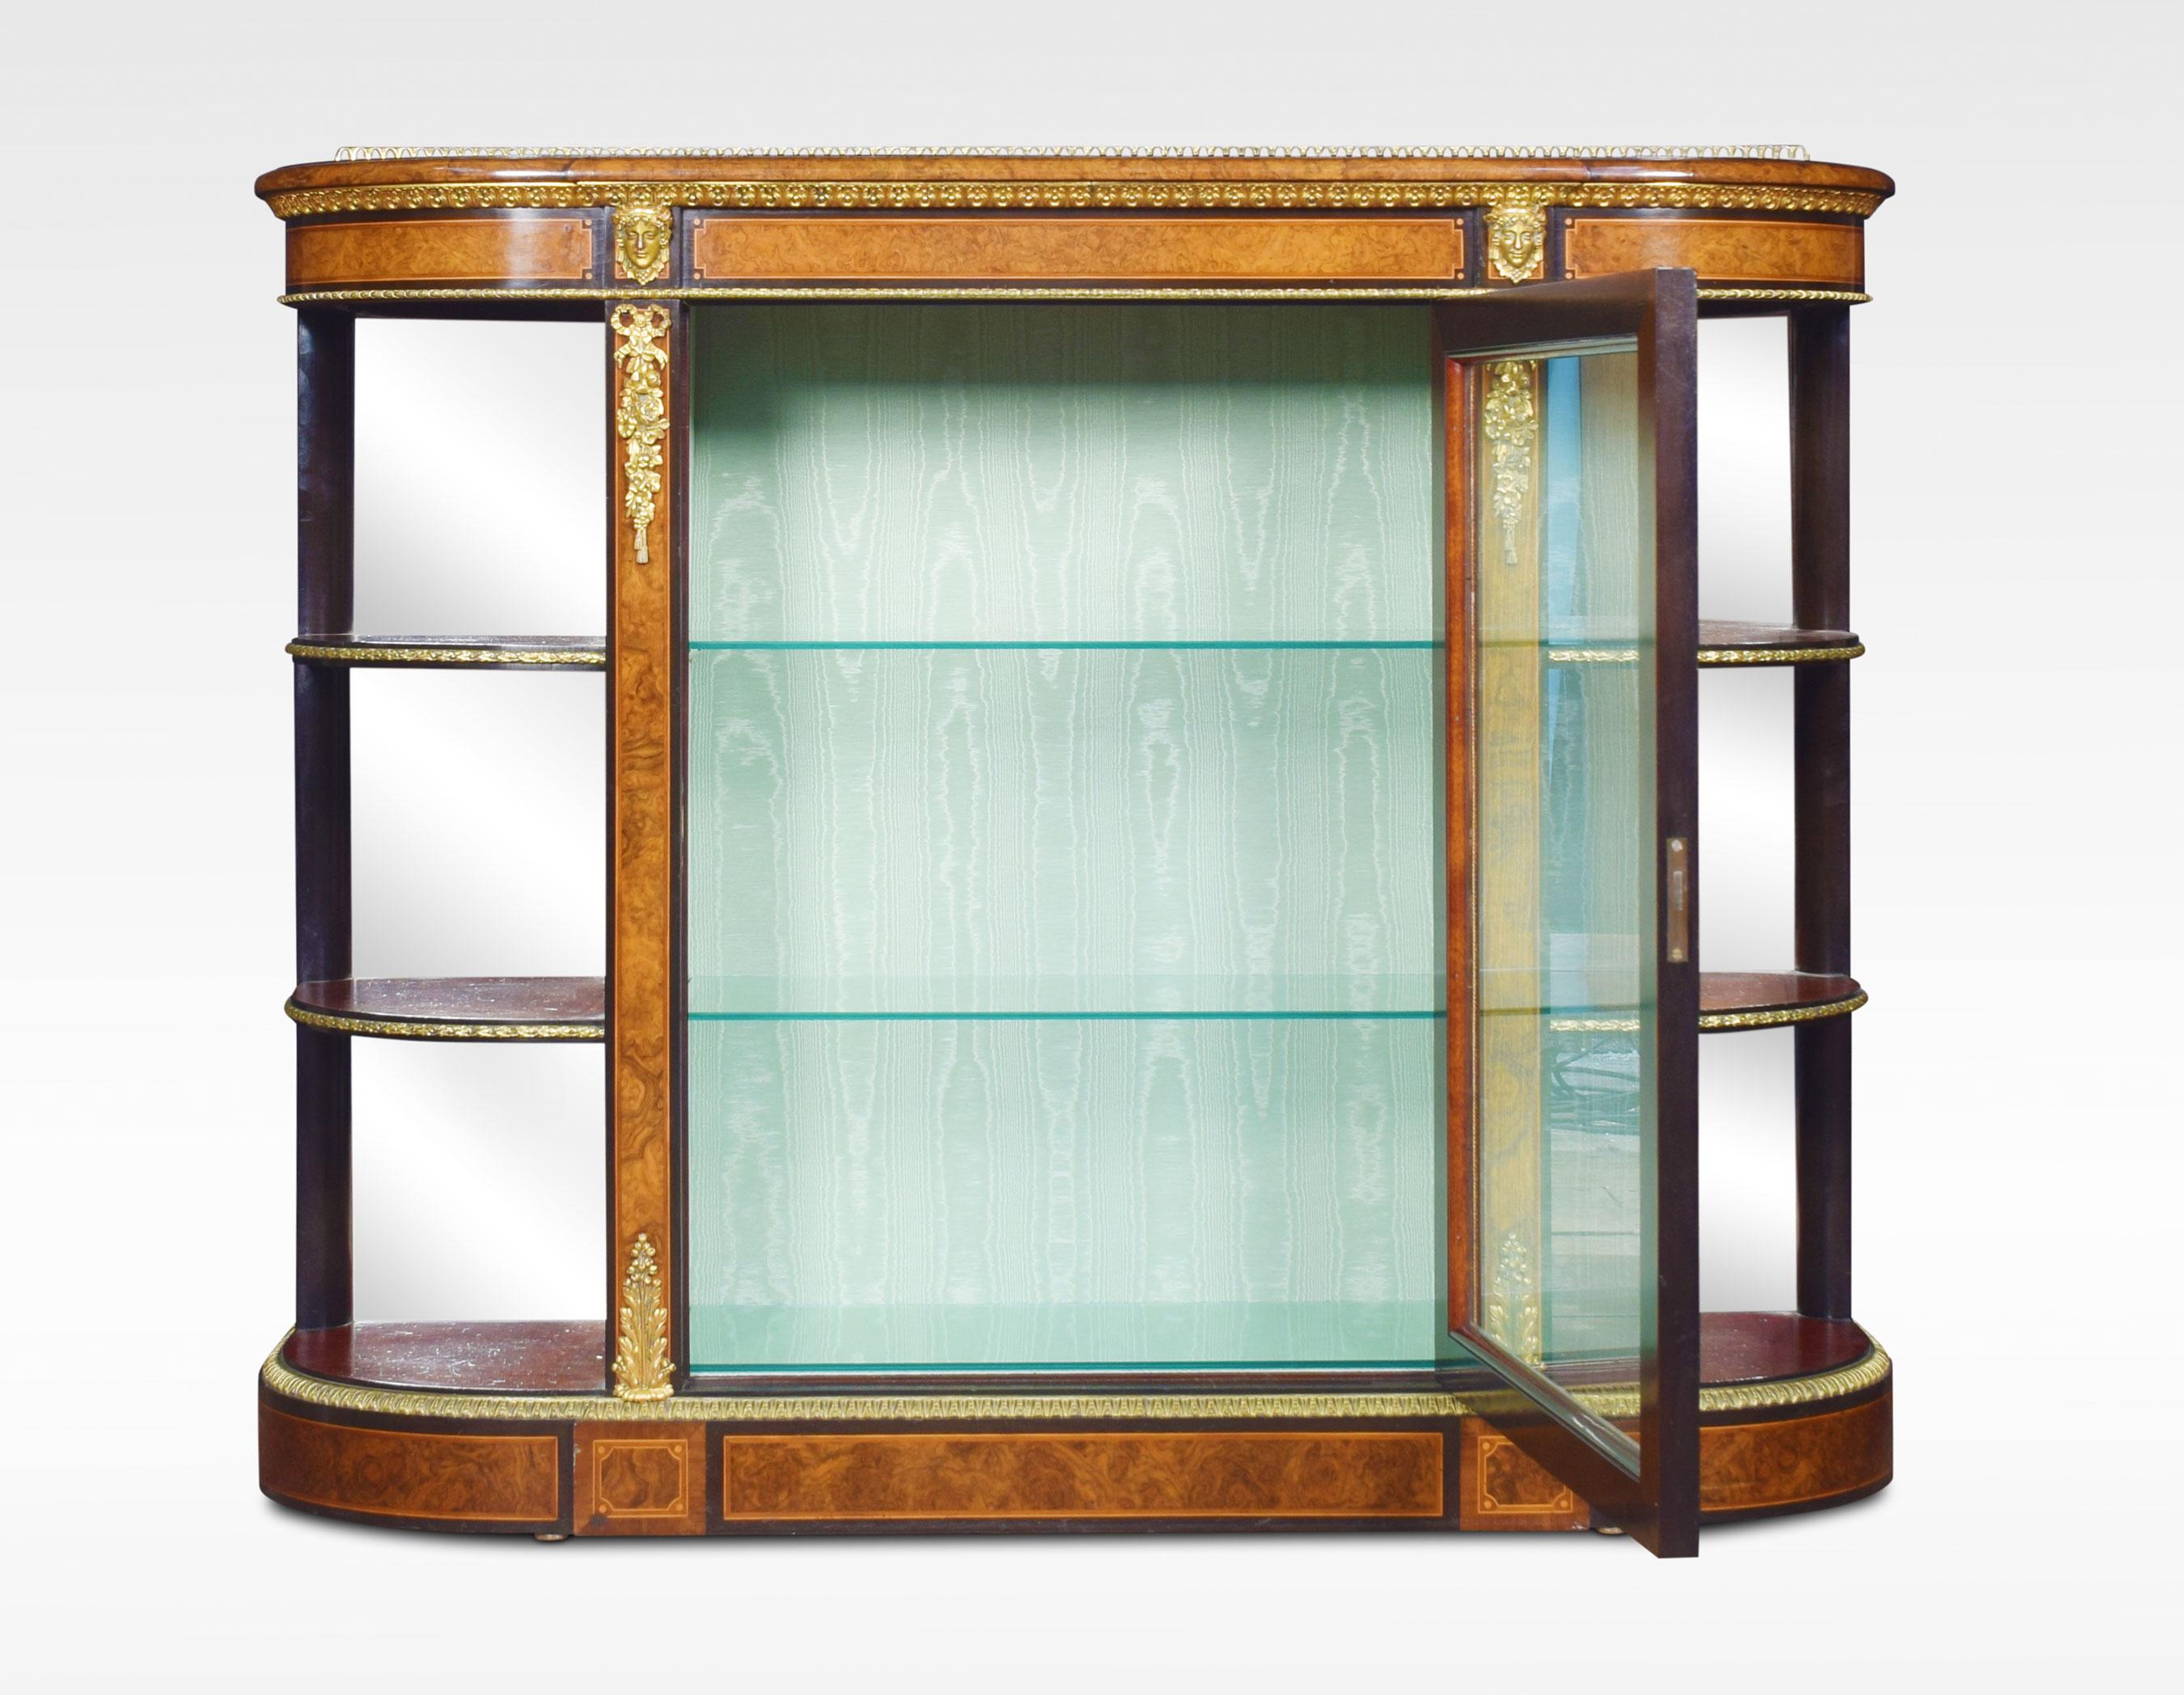 19th century figured walnut and ormolu-mounted credenza, the well figured top over ormolu mask mounts and acanthus banding, with a central glass door enclosing watermark silk-lined interior and two glass shelves. Flanked either side by open shelves